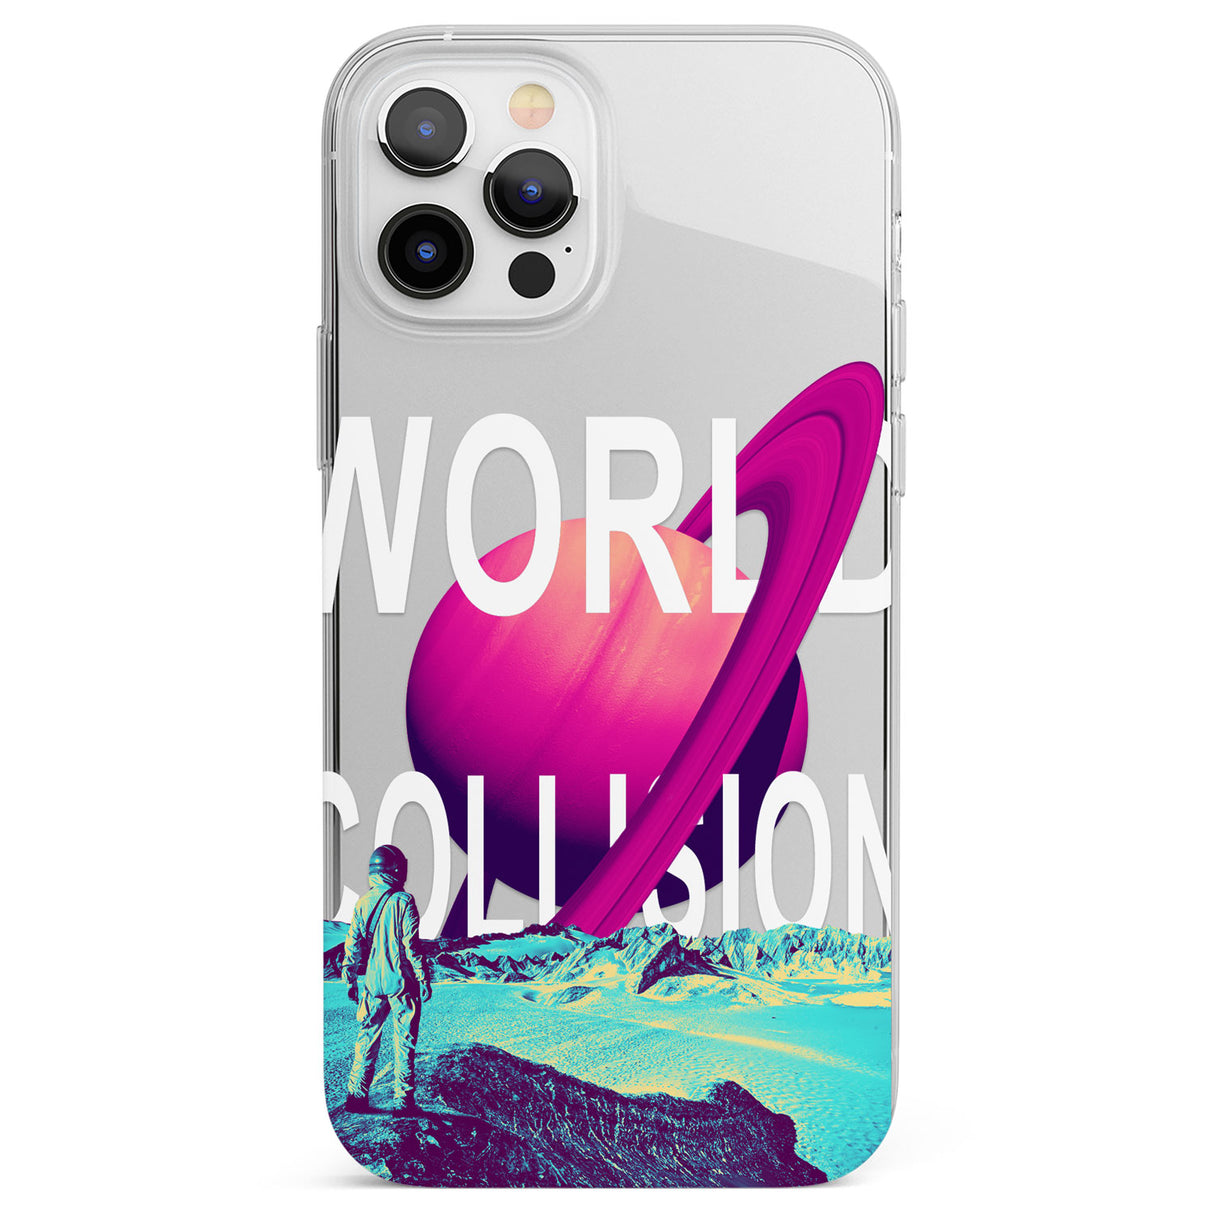 World Collision Phone Case for iPhone 12 Pro